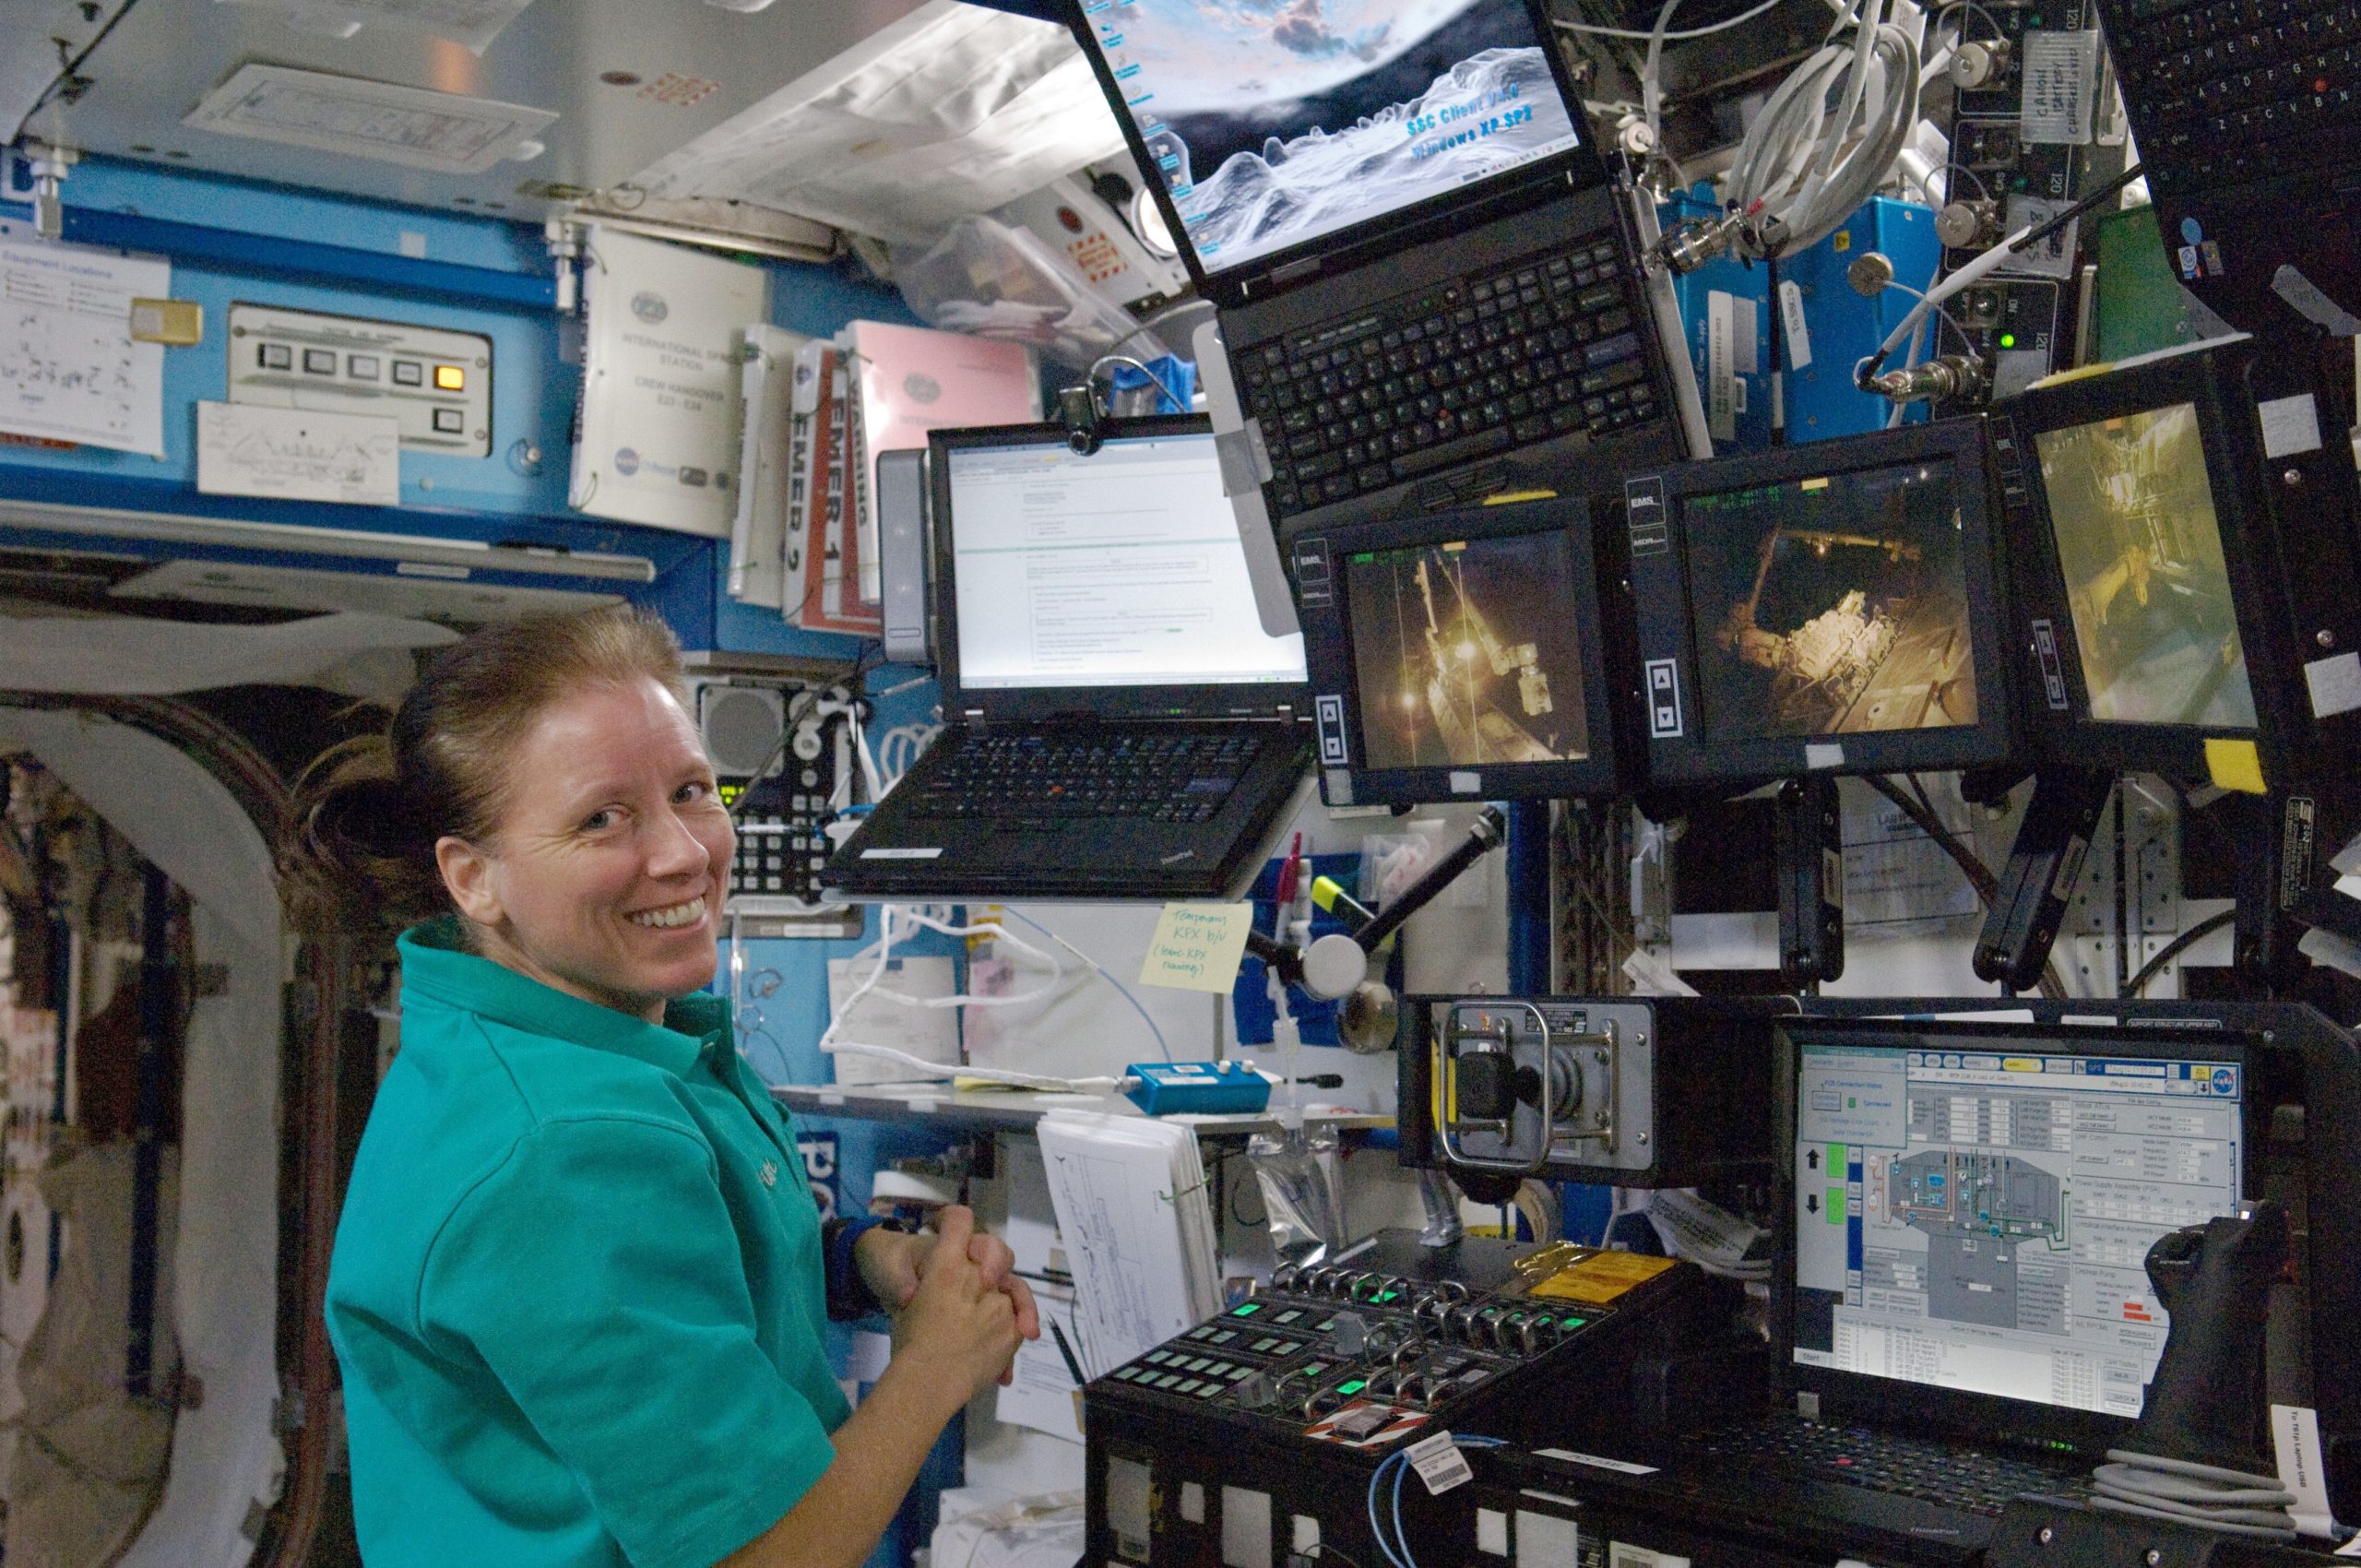 How Astronauts Use Laptops On The International Space Station